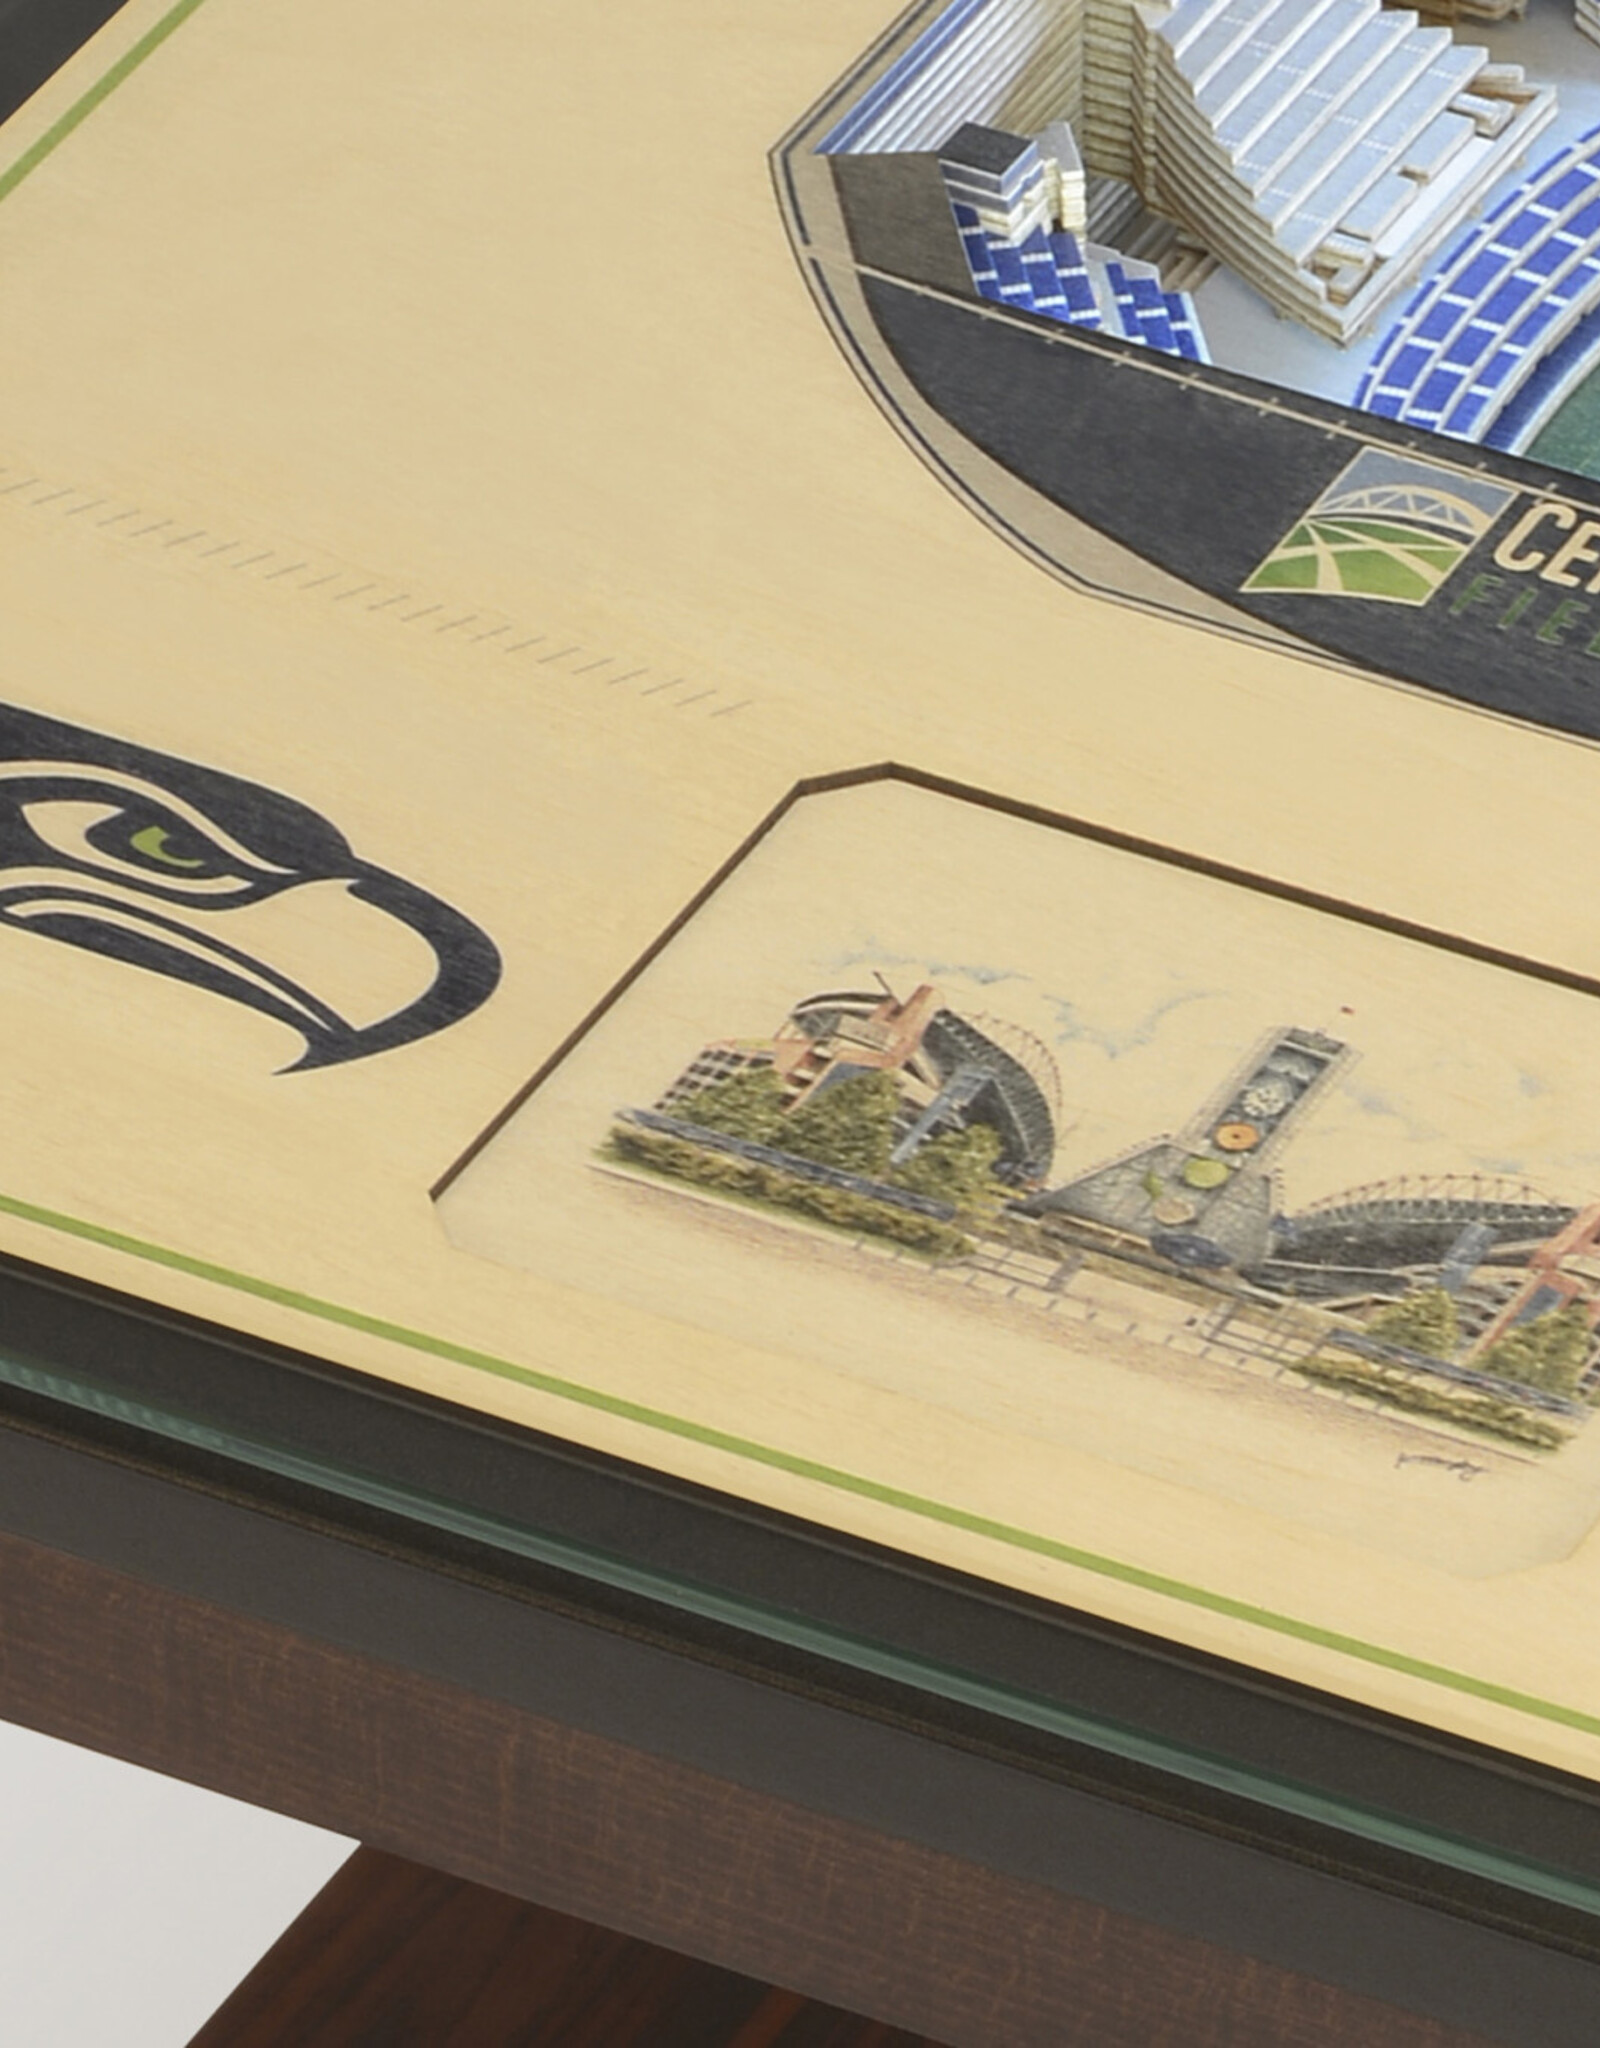 YOU THE FAN Seattle Seahawks 25-Layer LED StadiumView End Table